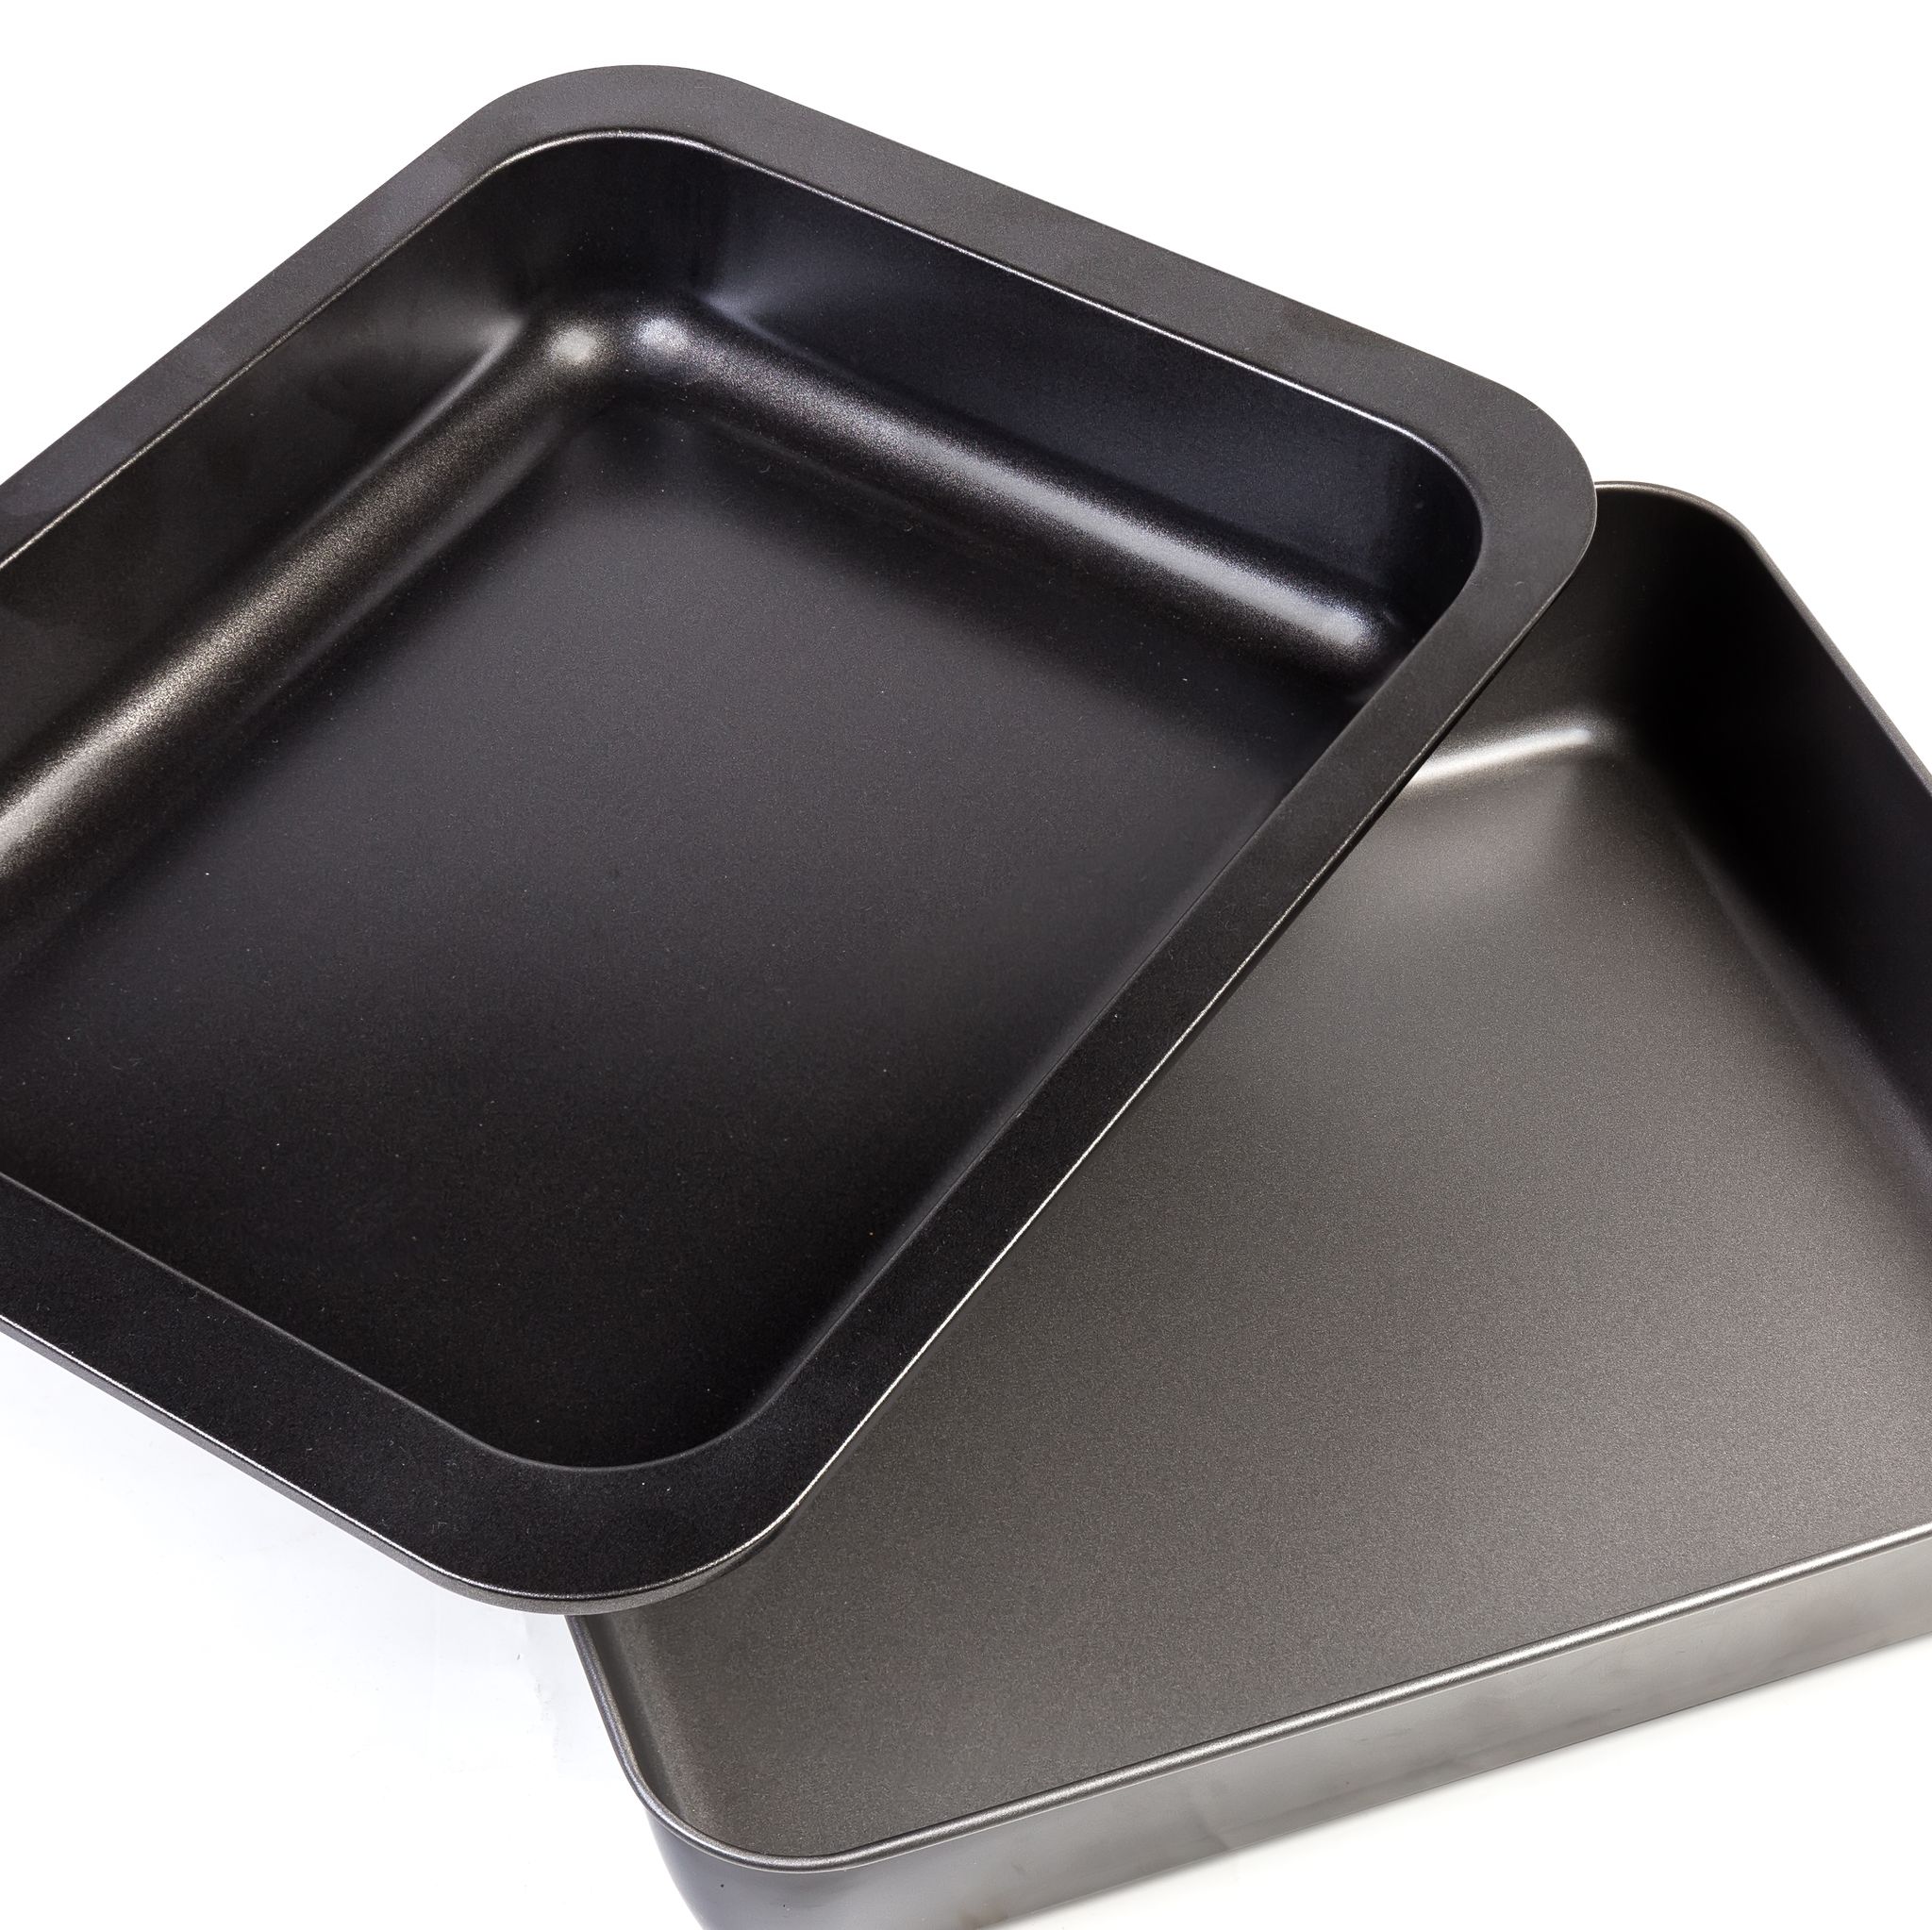 How to Keep Baking Trays Spotless: Follow 5-Step Cleaning Hack